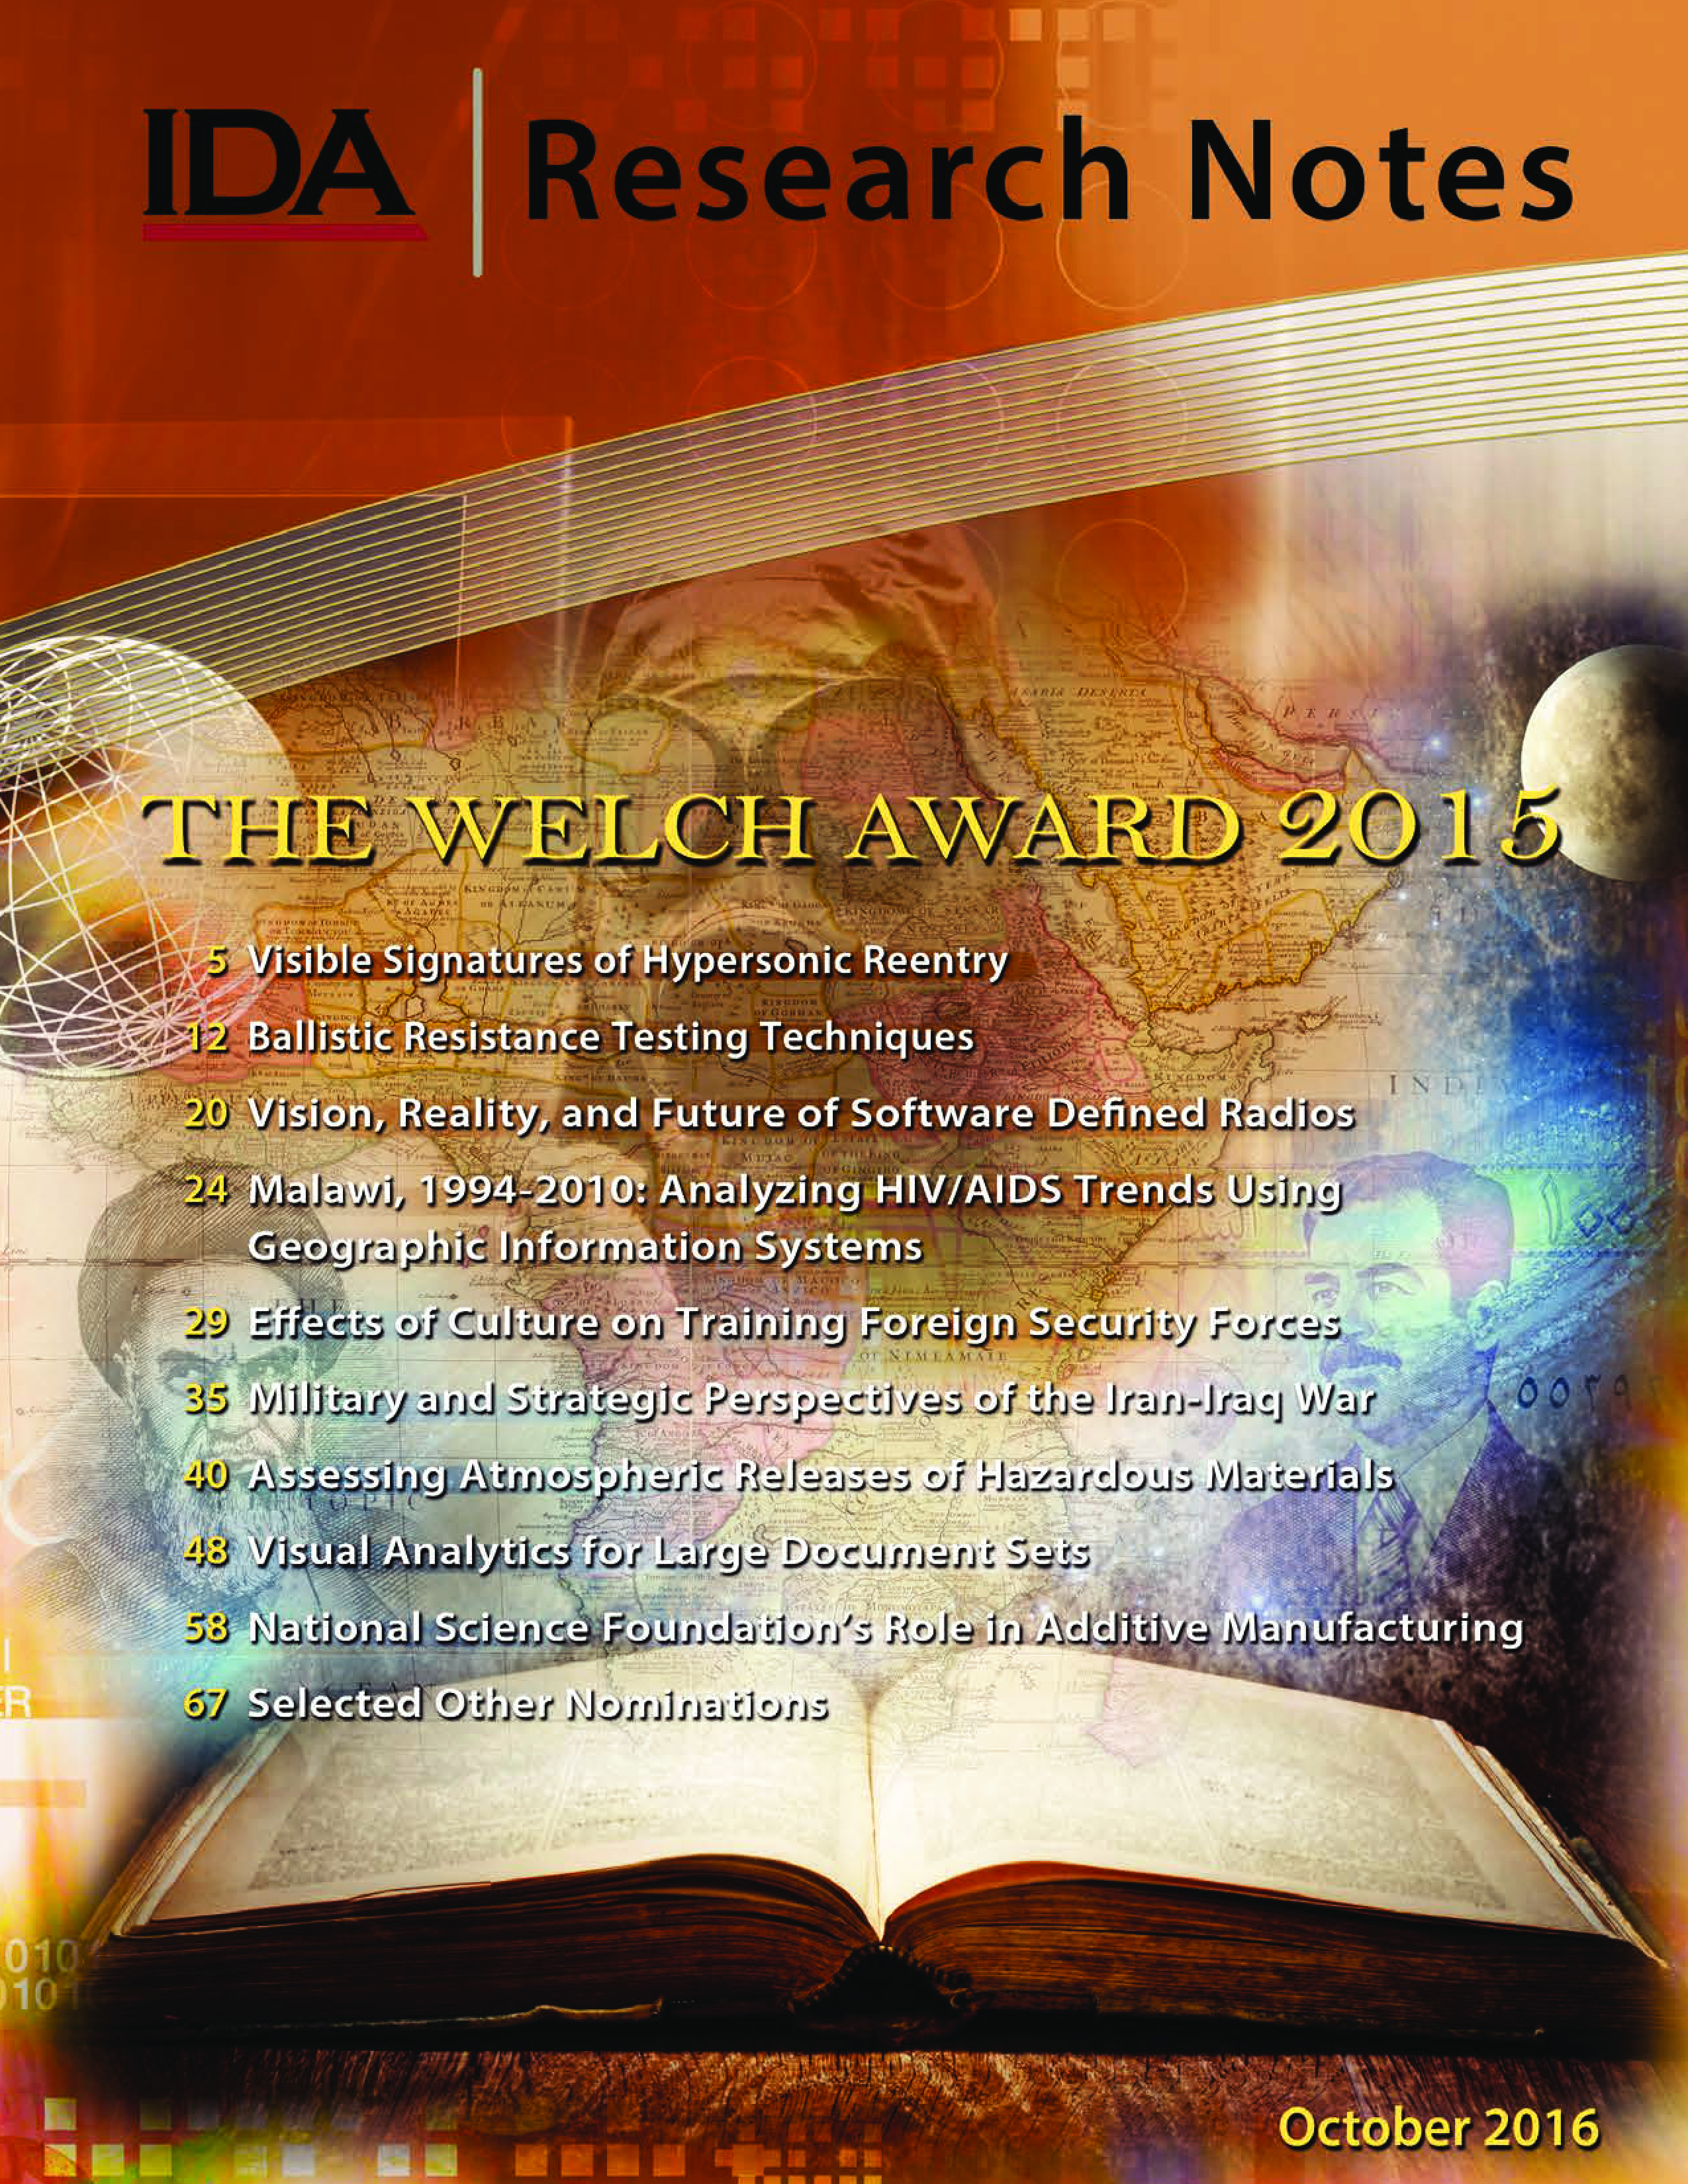 IDA Research Notes, The Welch Award 2015